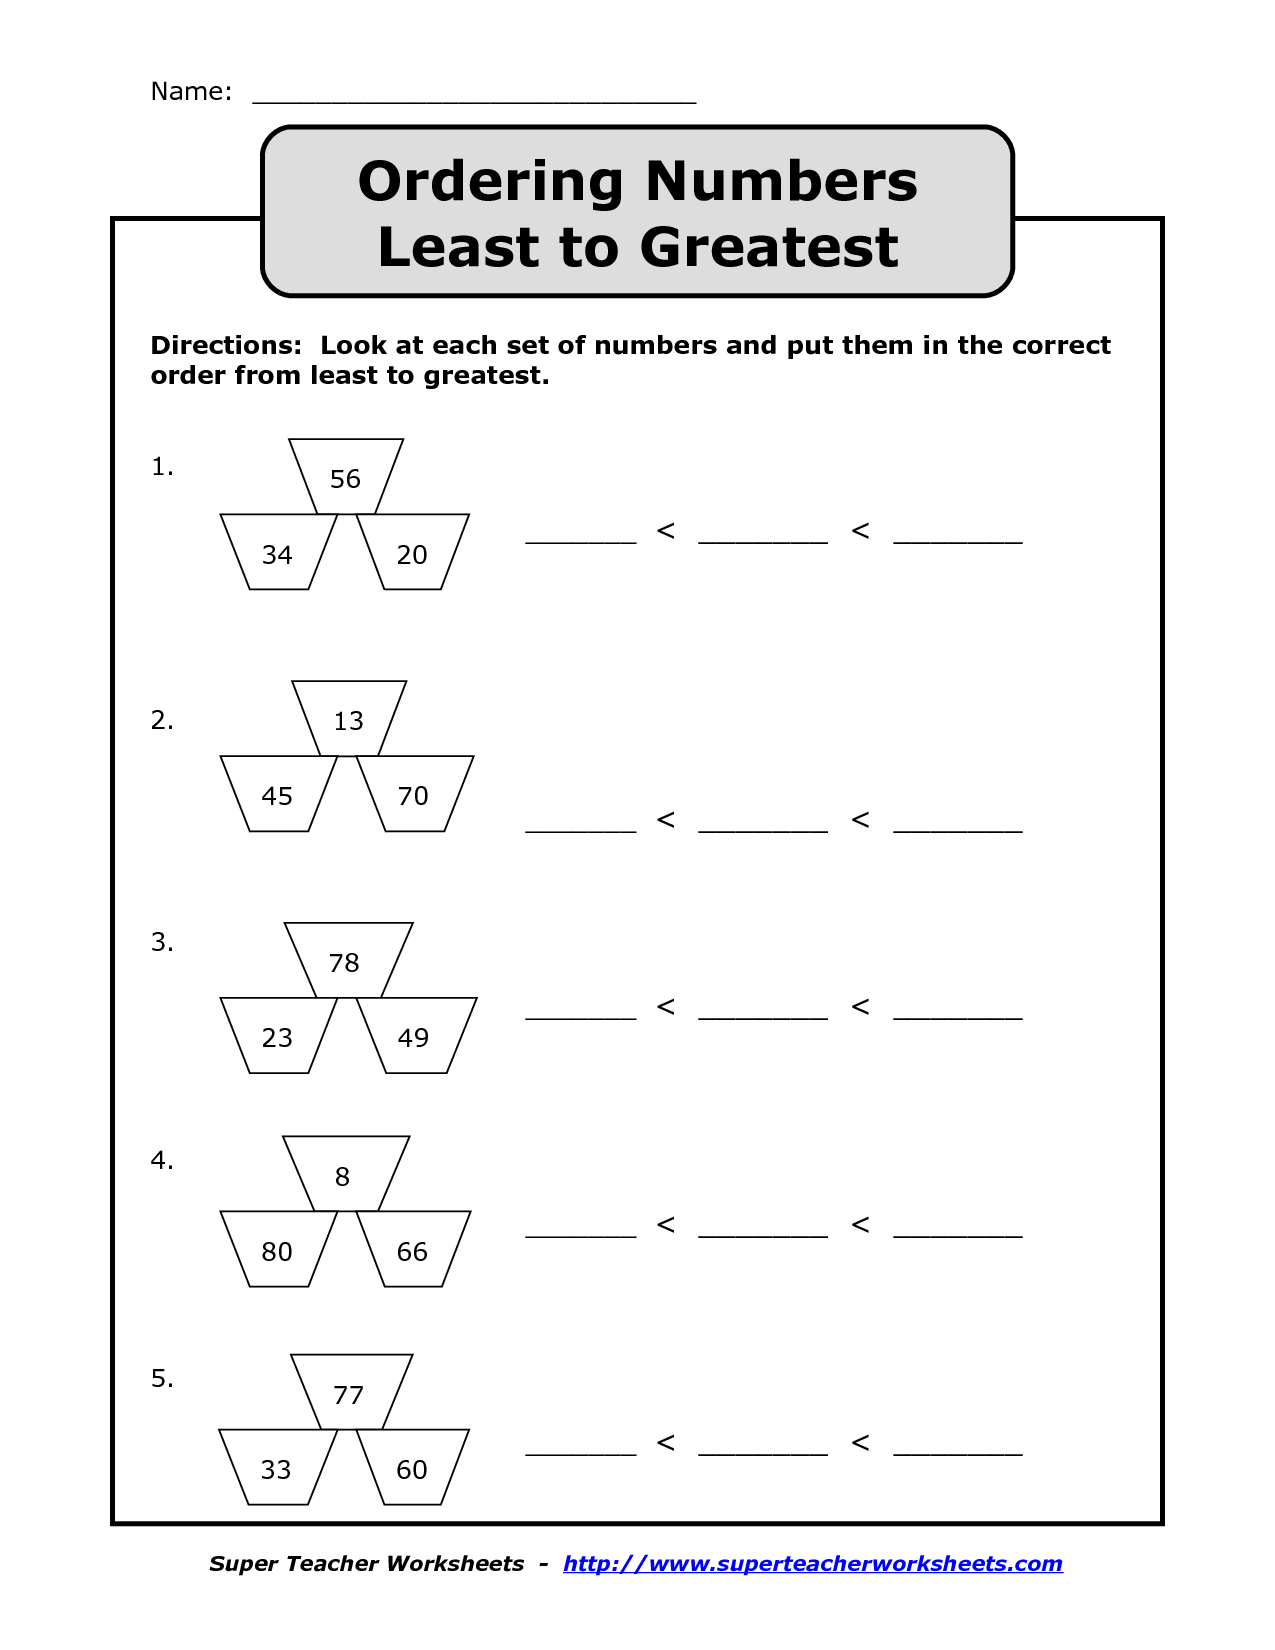 Order Numbers From Least To Greatest Worksheet Grade 2